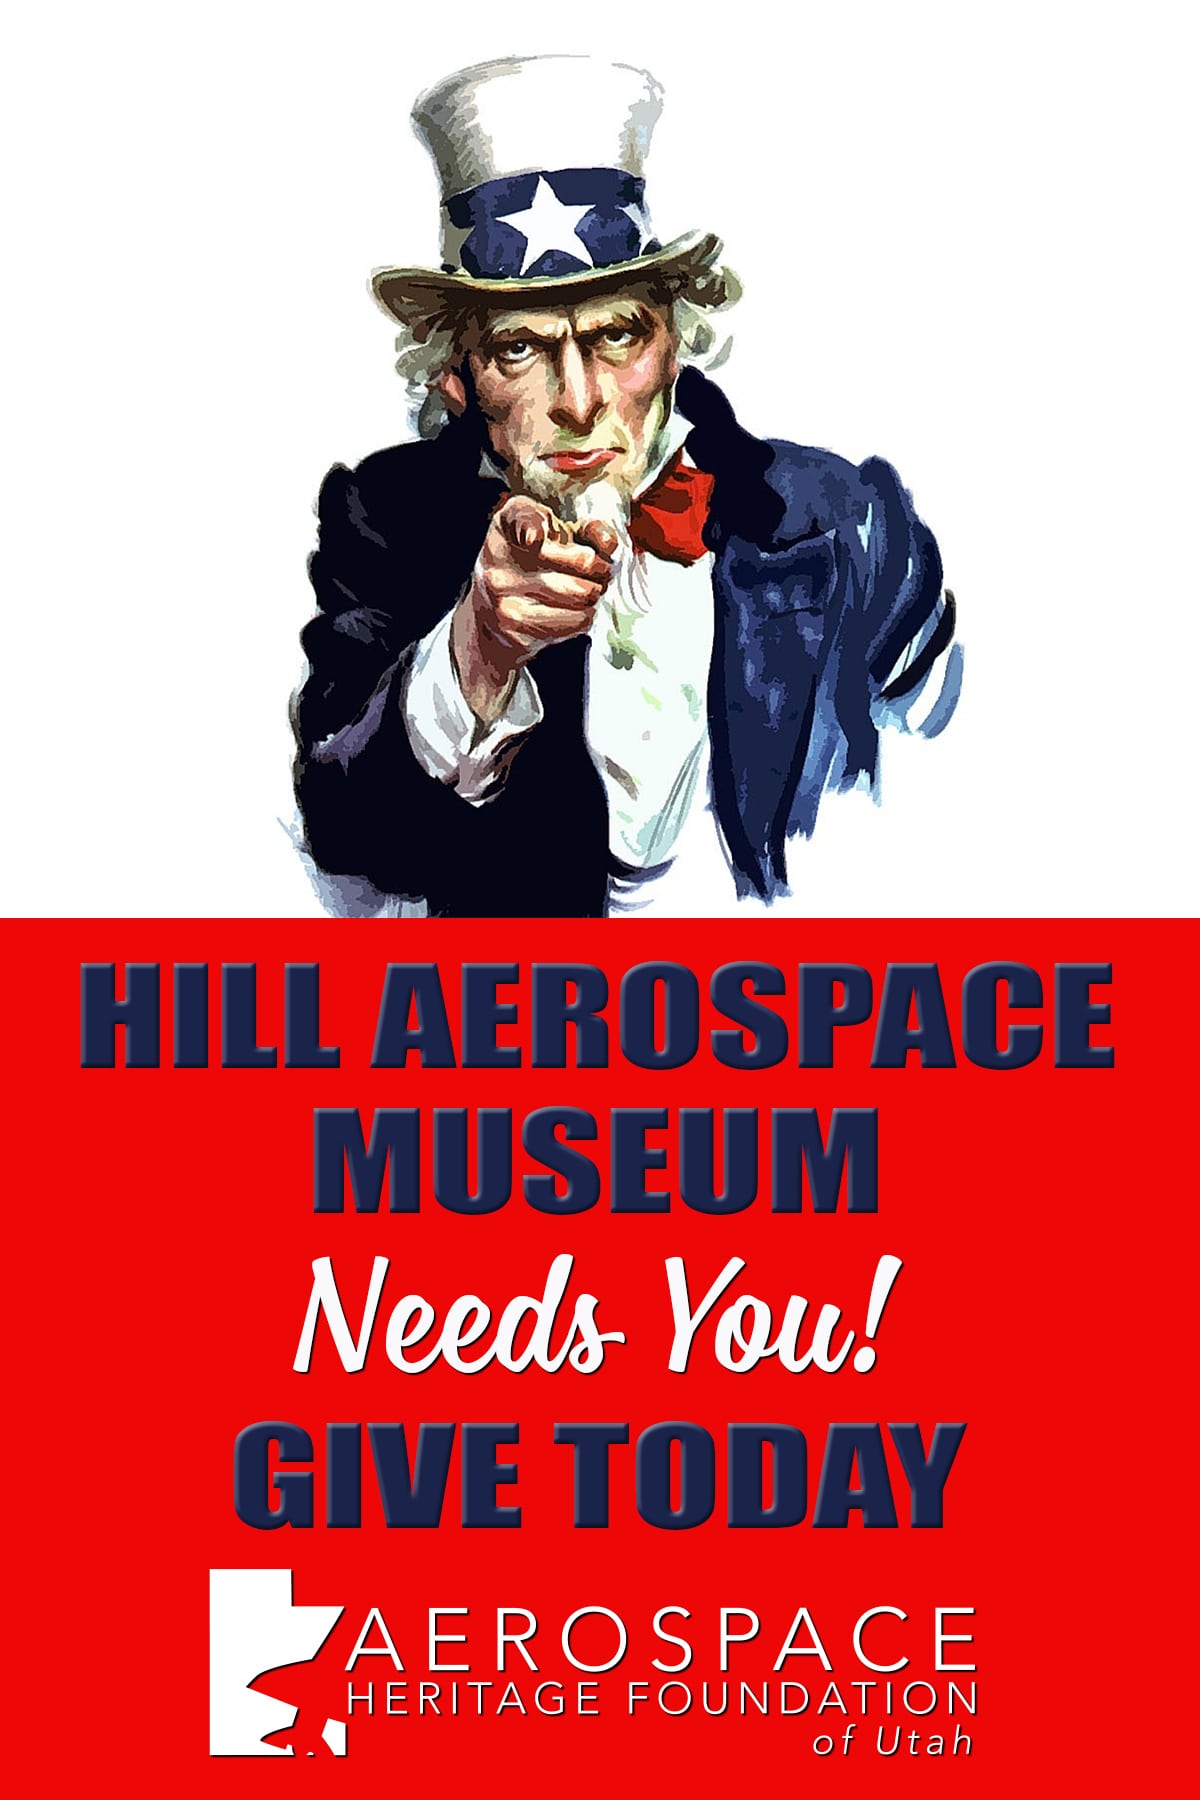 We Want You to give to the Museum!